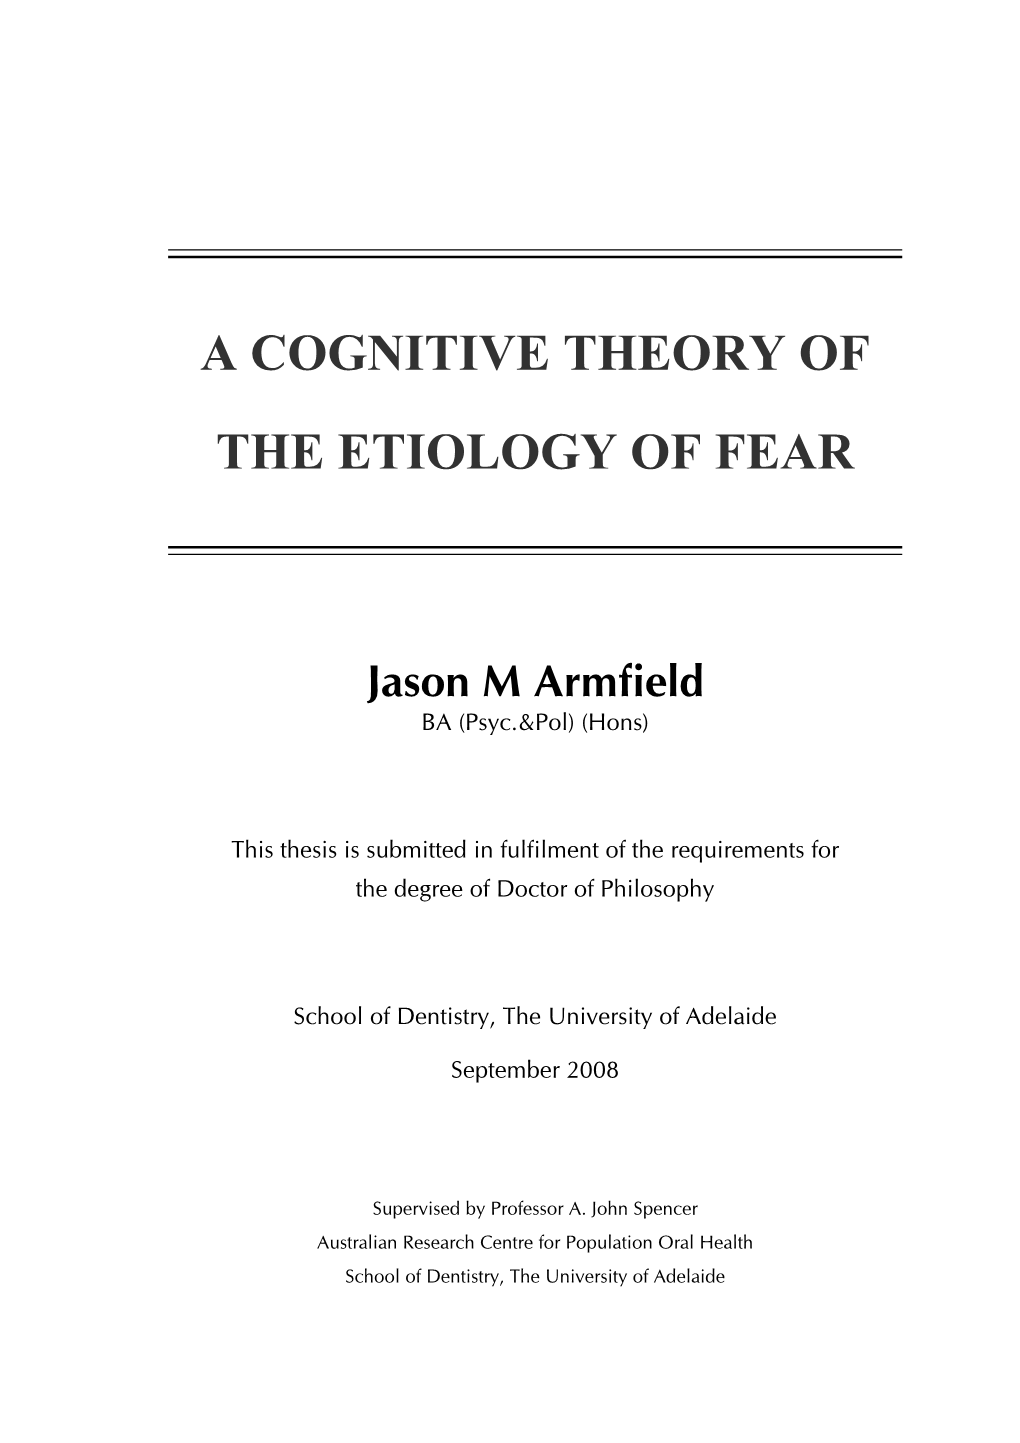 A Cognitive Theory of the Etiology of Fear